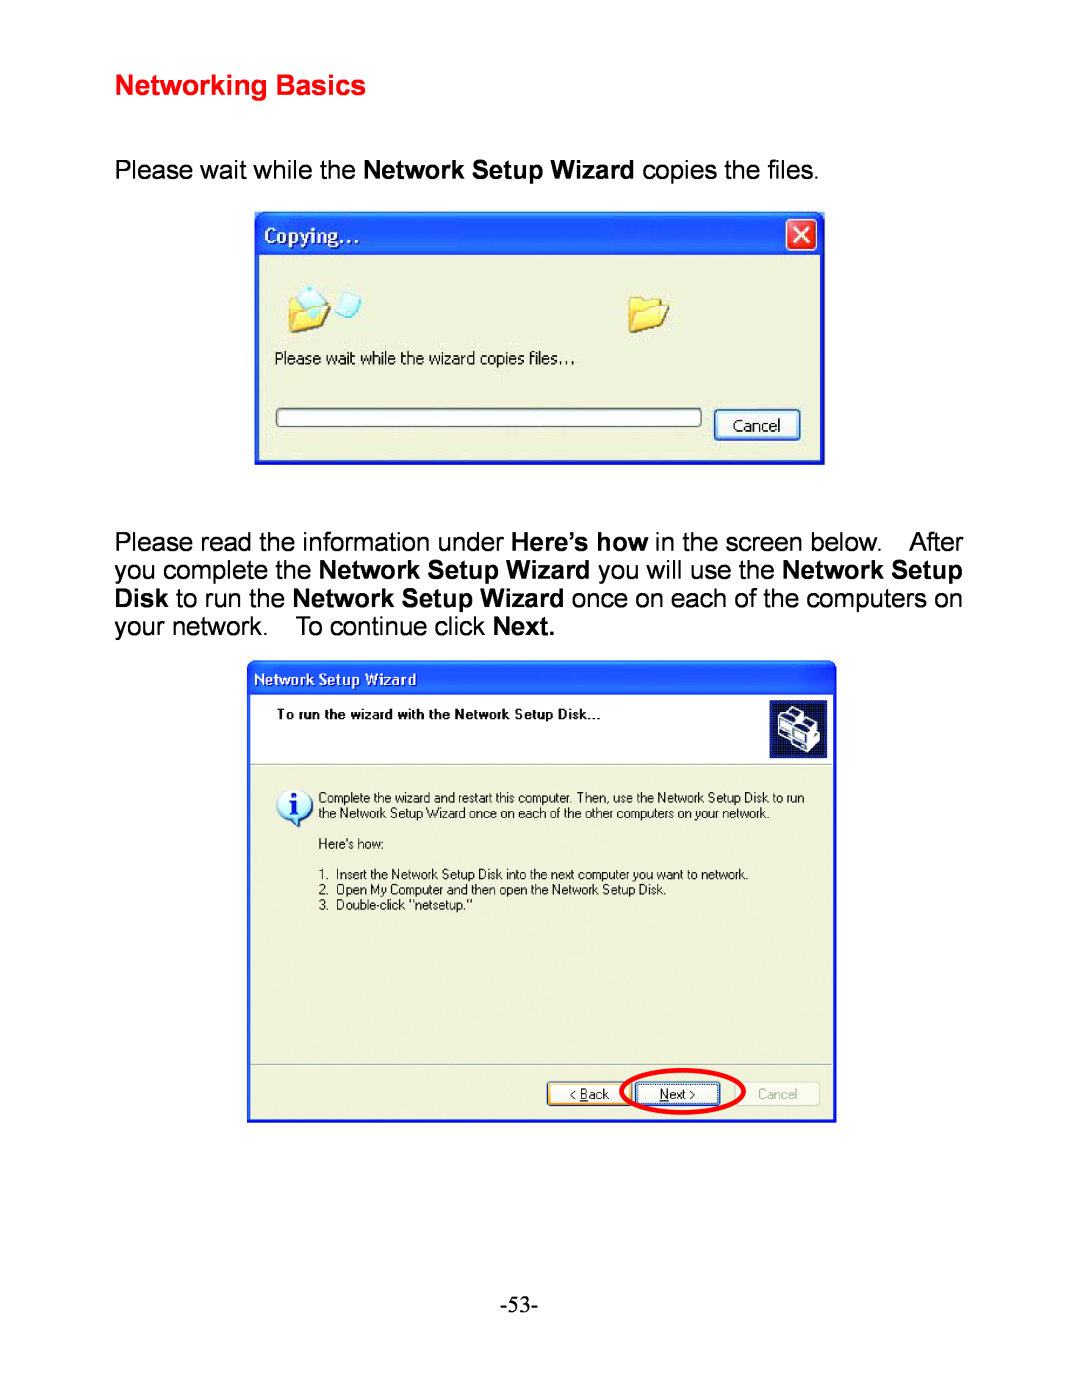 D-Link DI-604 manual Networking Basics, Please wait while the Network Setup Wizard copies the files 